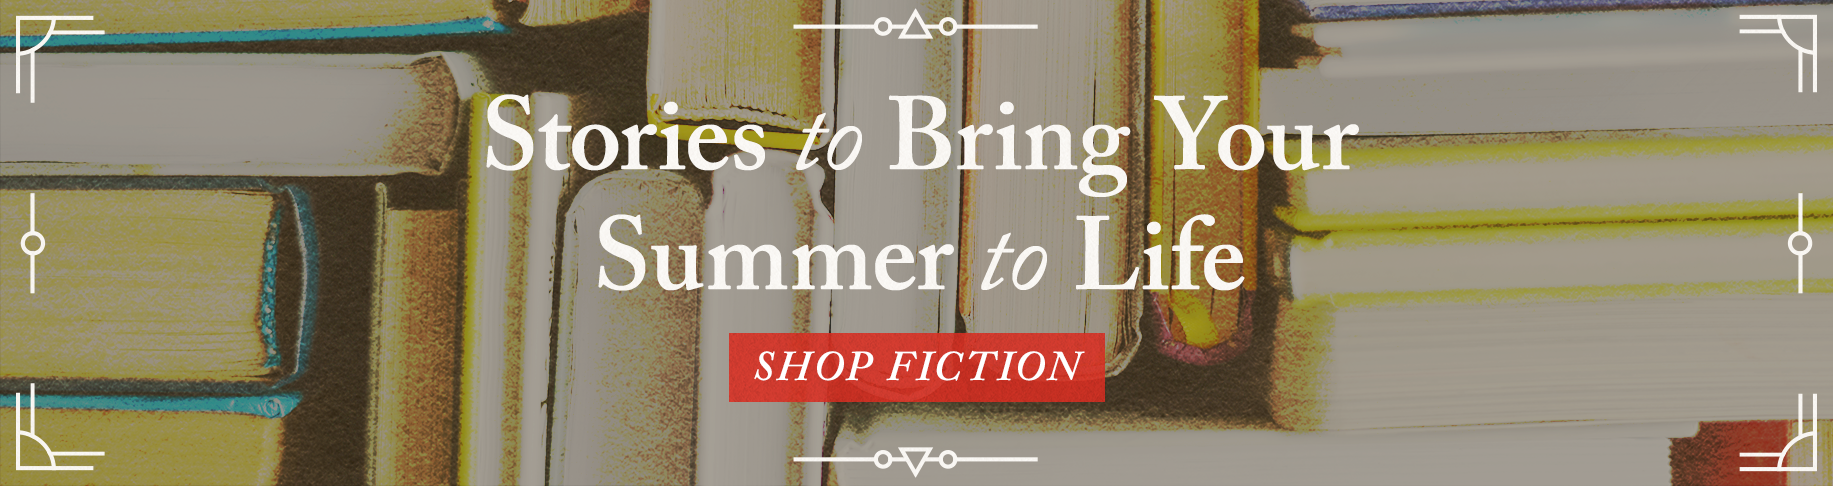 Great Fiction for Summer Reading - Shop Fiction